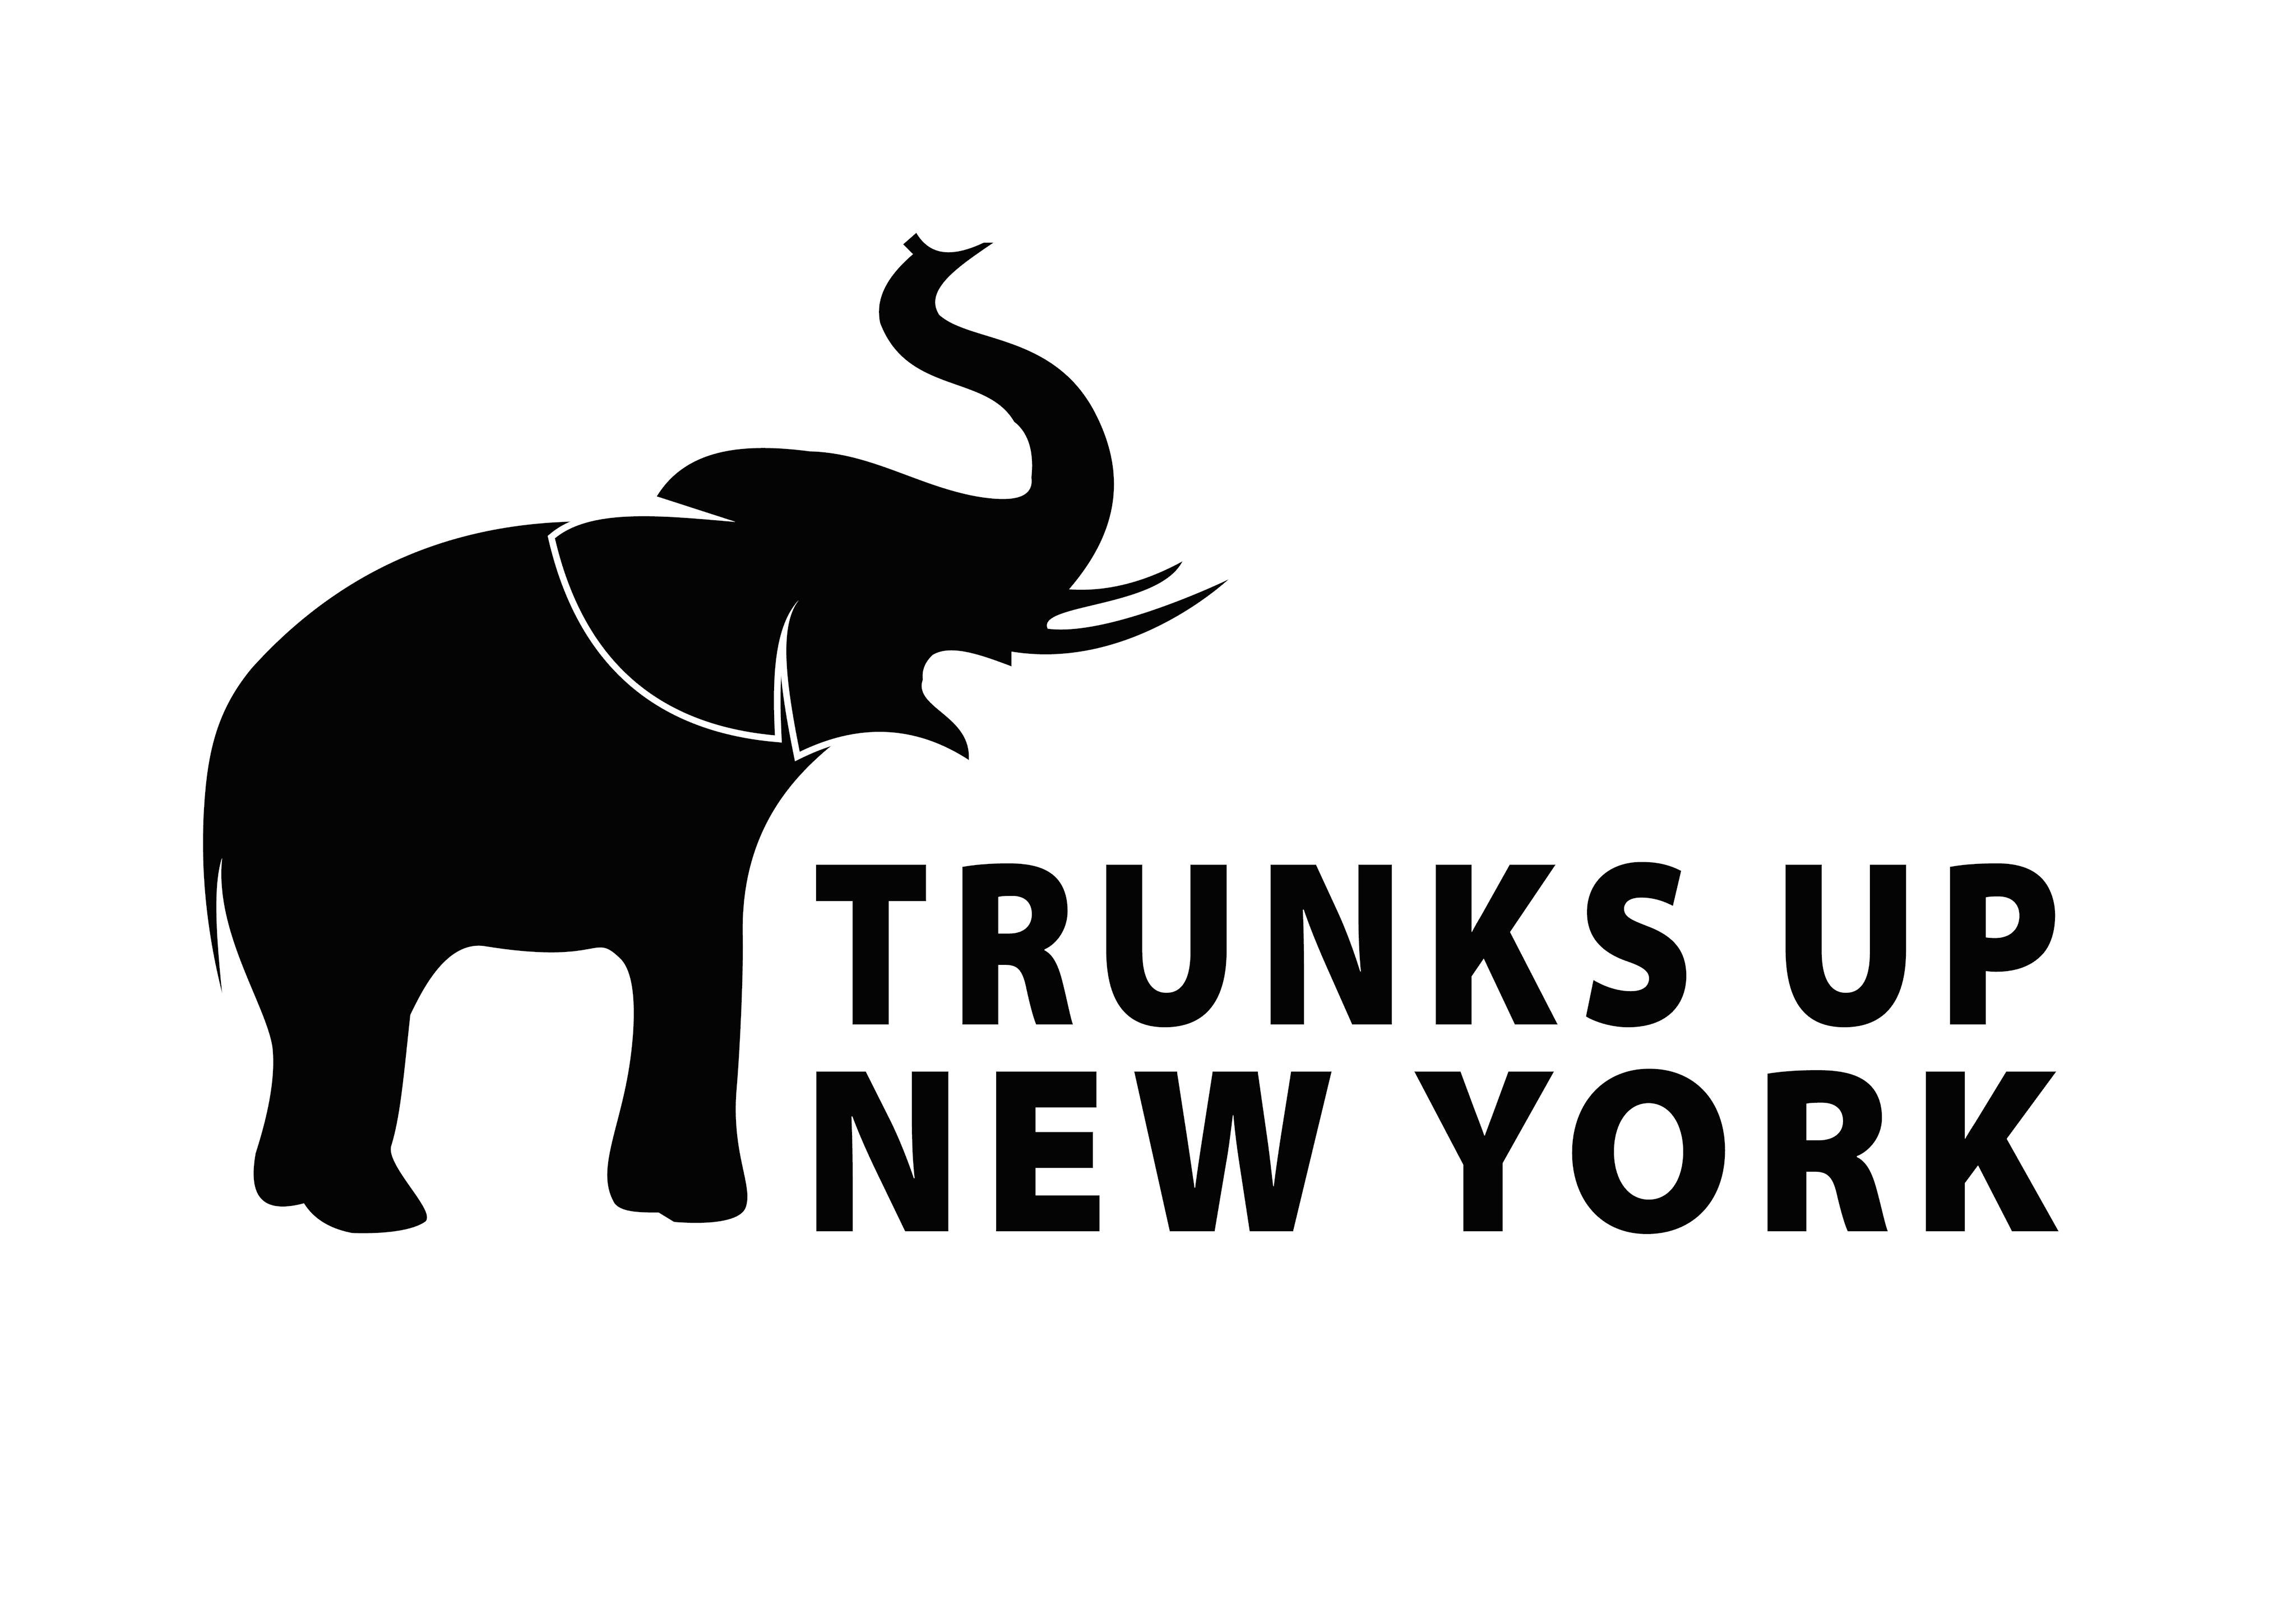 Trunks Up is a community dedicated to the protection of elephants. We support the mission of Save Elephant Foundation and its founder, Lek Chailert.